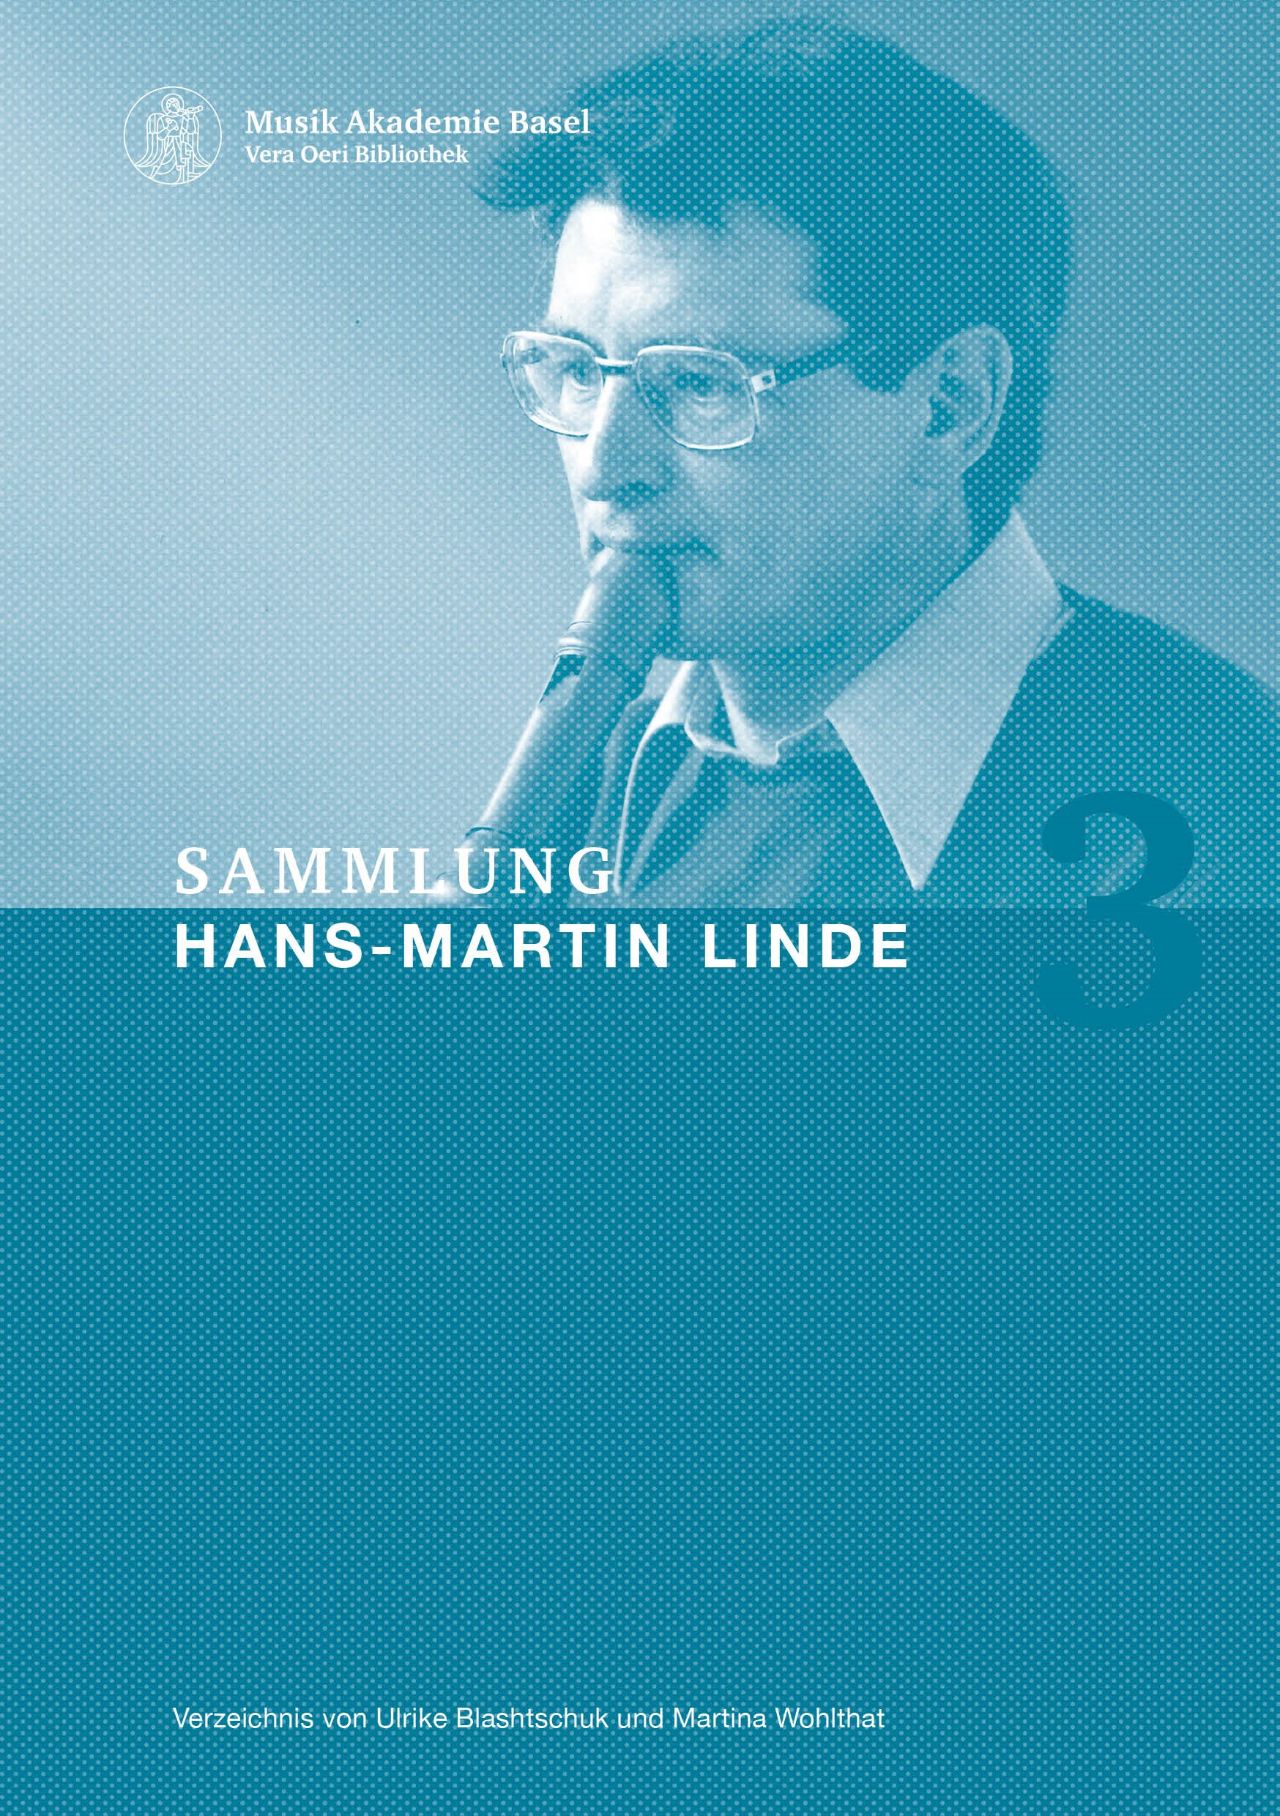 Cover of the  Hans-Martin Linde Collection